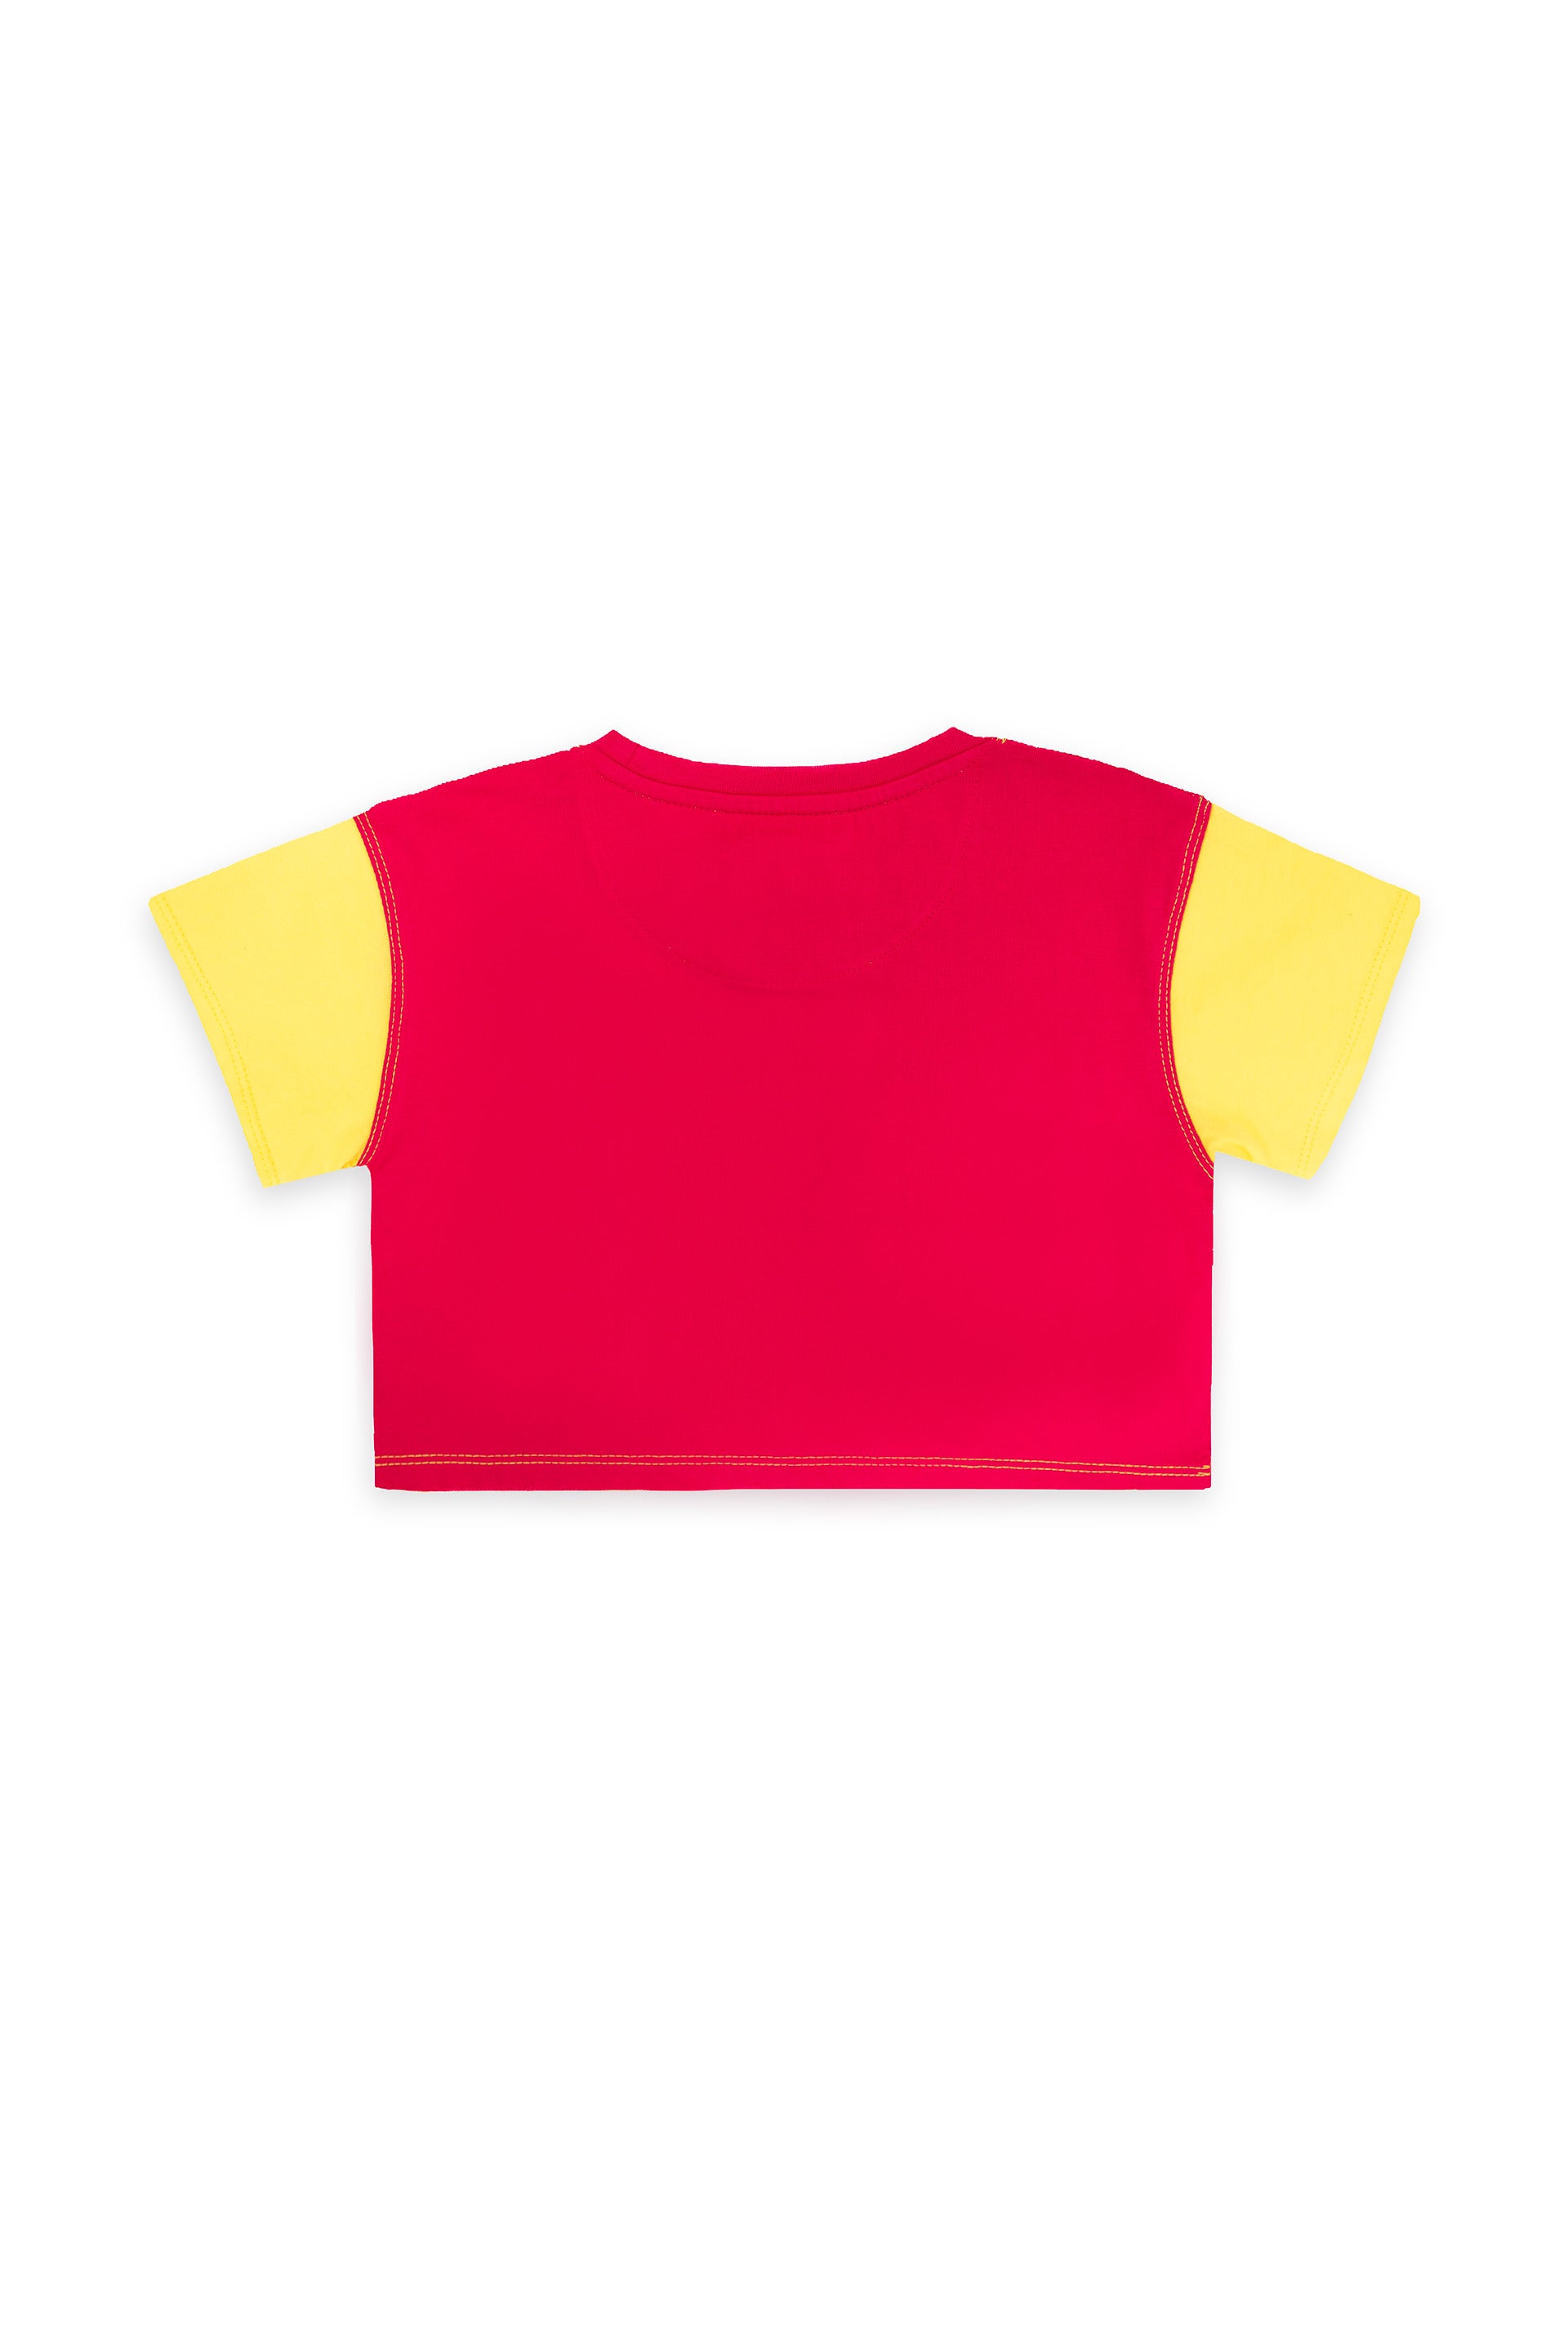 Contrasting Tee Yellow/Pink